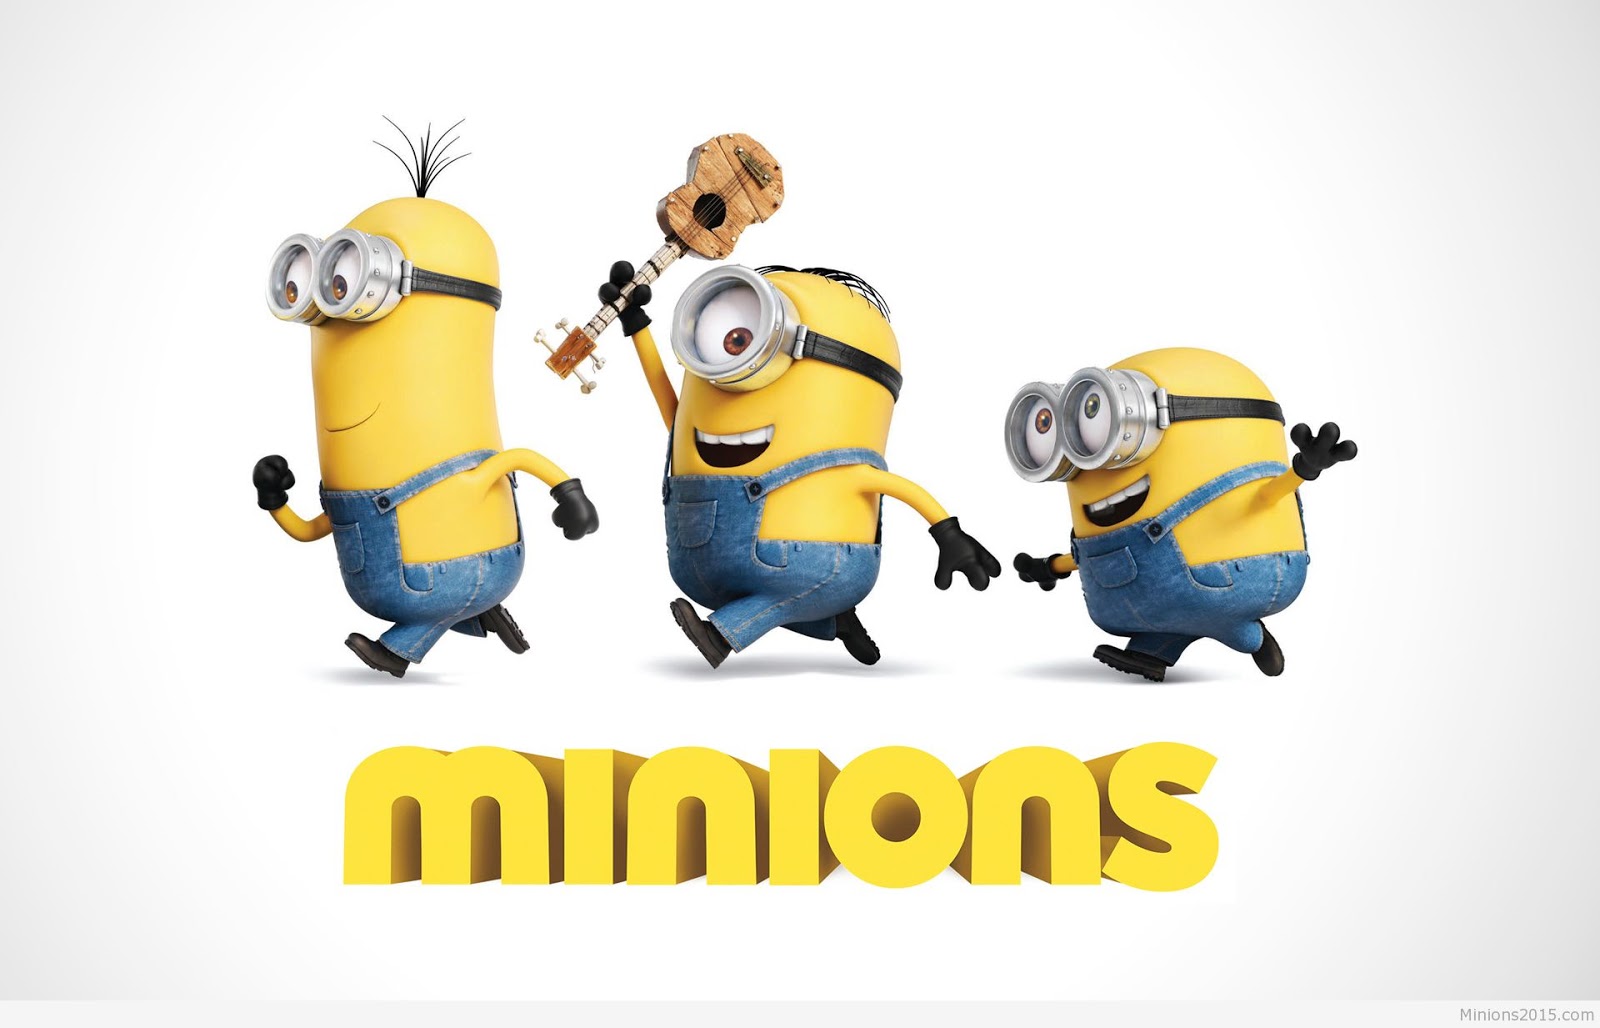 The Great Adventure: I Love Minions, But...